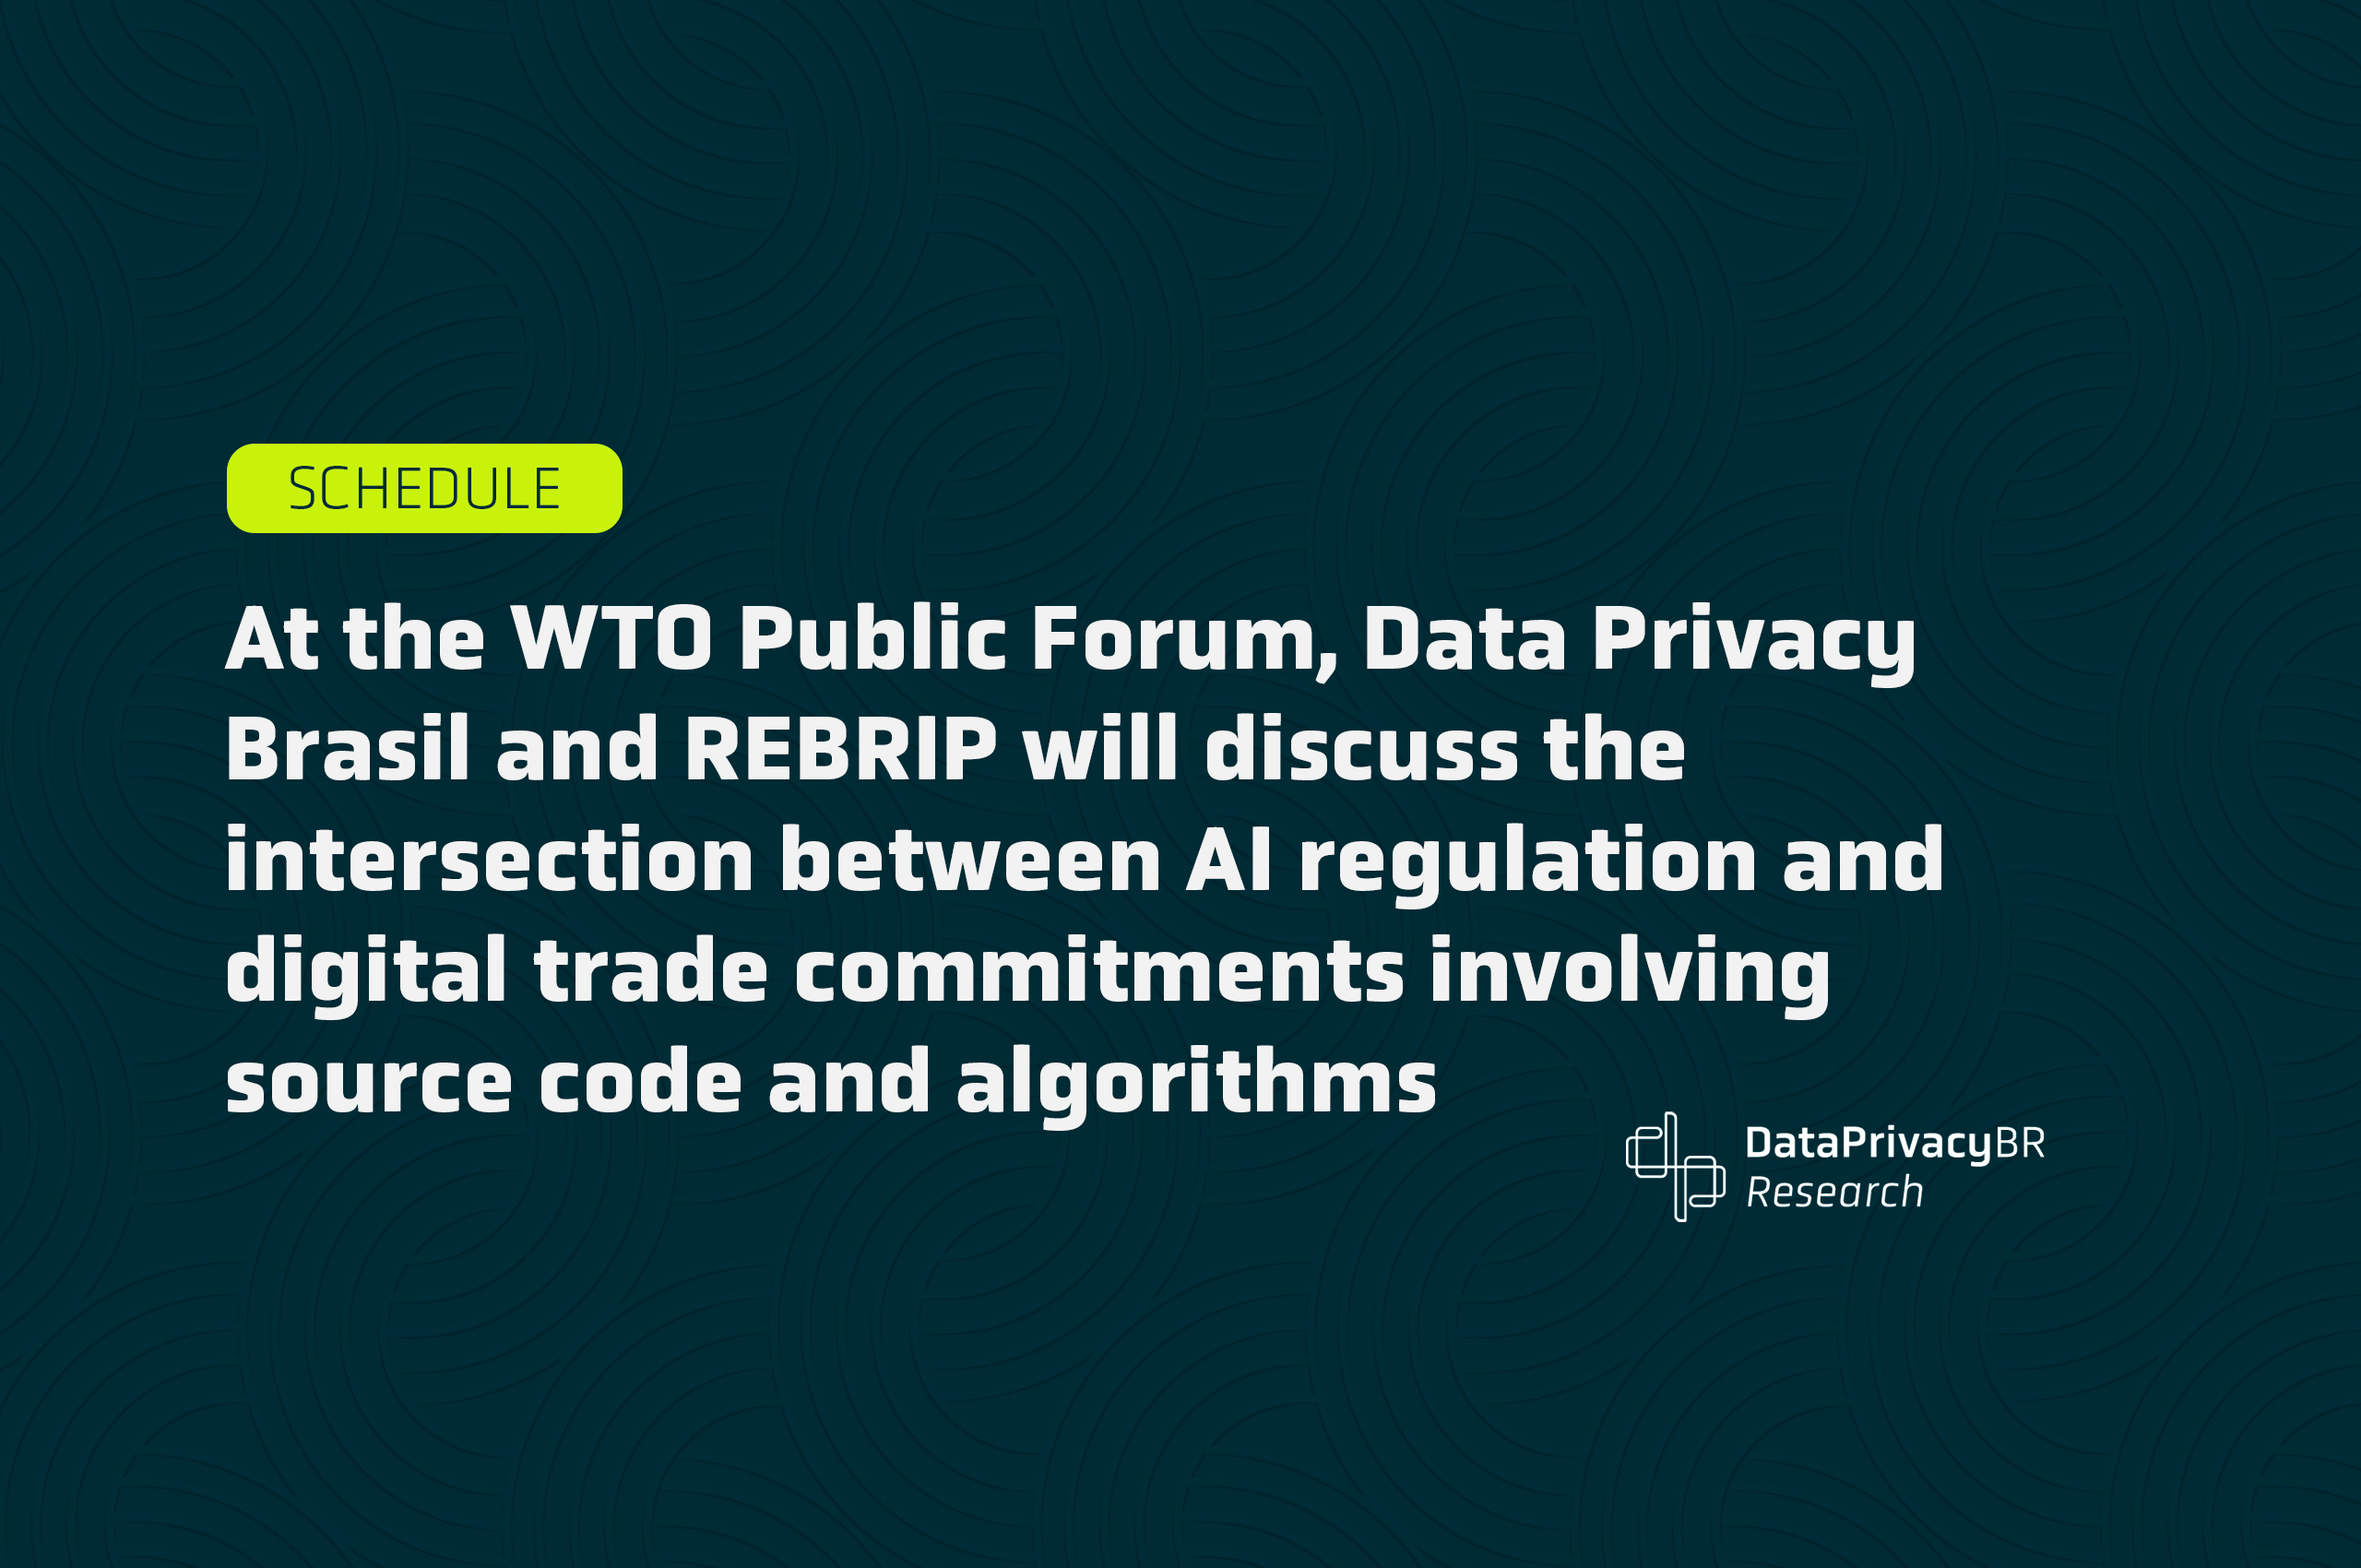 http://At%20the%20WTO%20Public%20Forum,%20Data%20Privacy%20Brasil%20and%20REBRIP%20will%20discuss%20the%20intersection%20between%20AI%20regulation%20and%20digital%20trade%20commitments%20involving%20source%20code%20and%20algorithms.